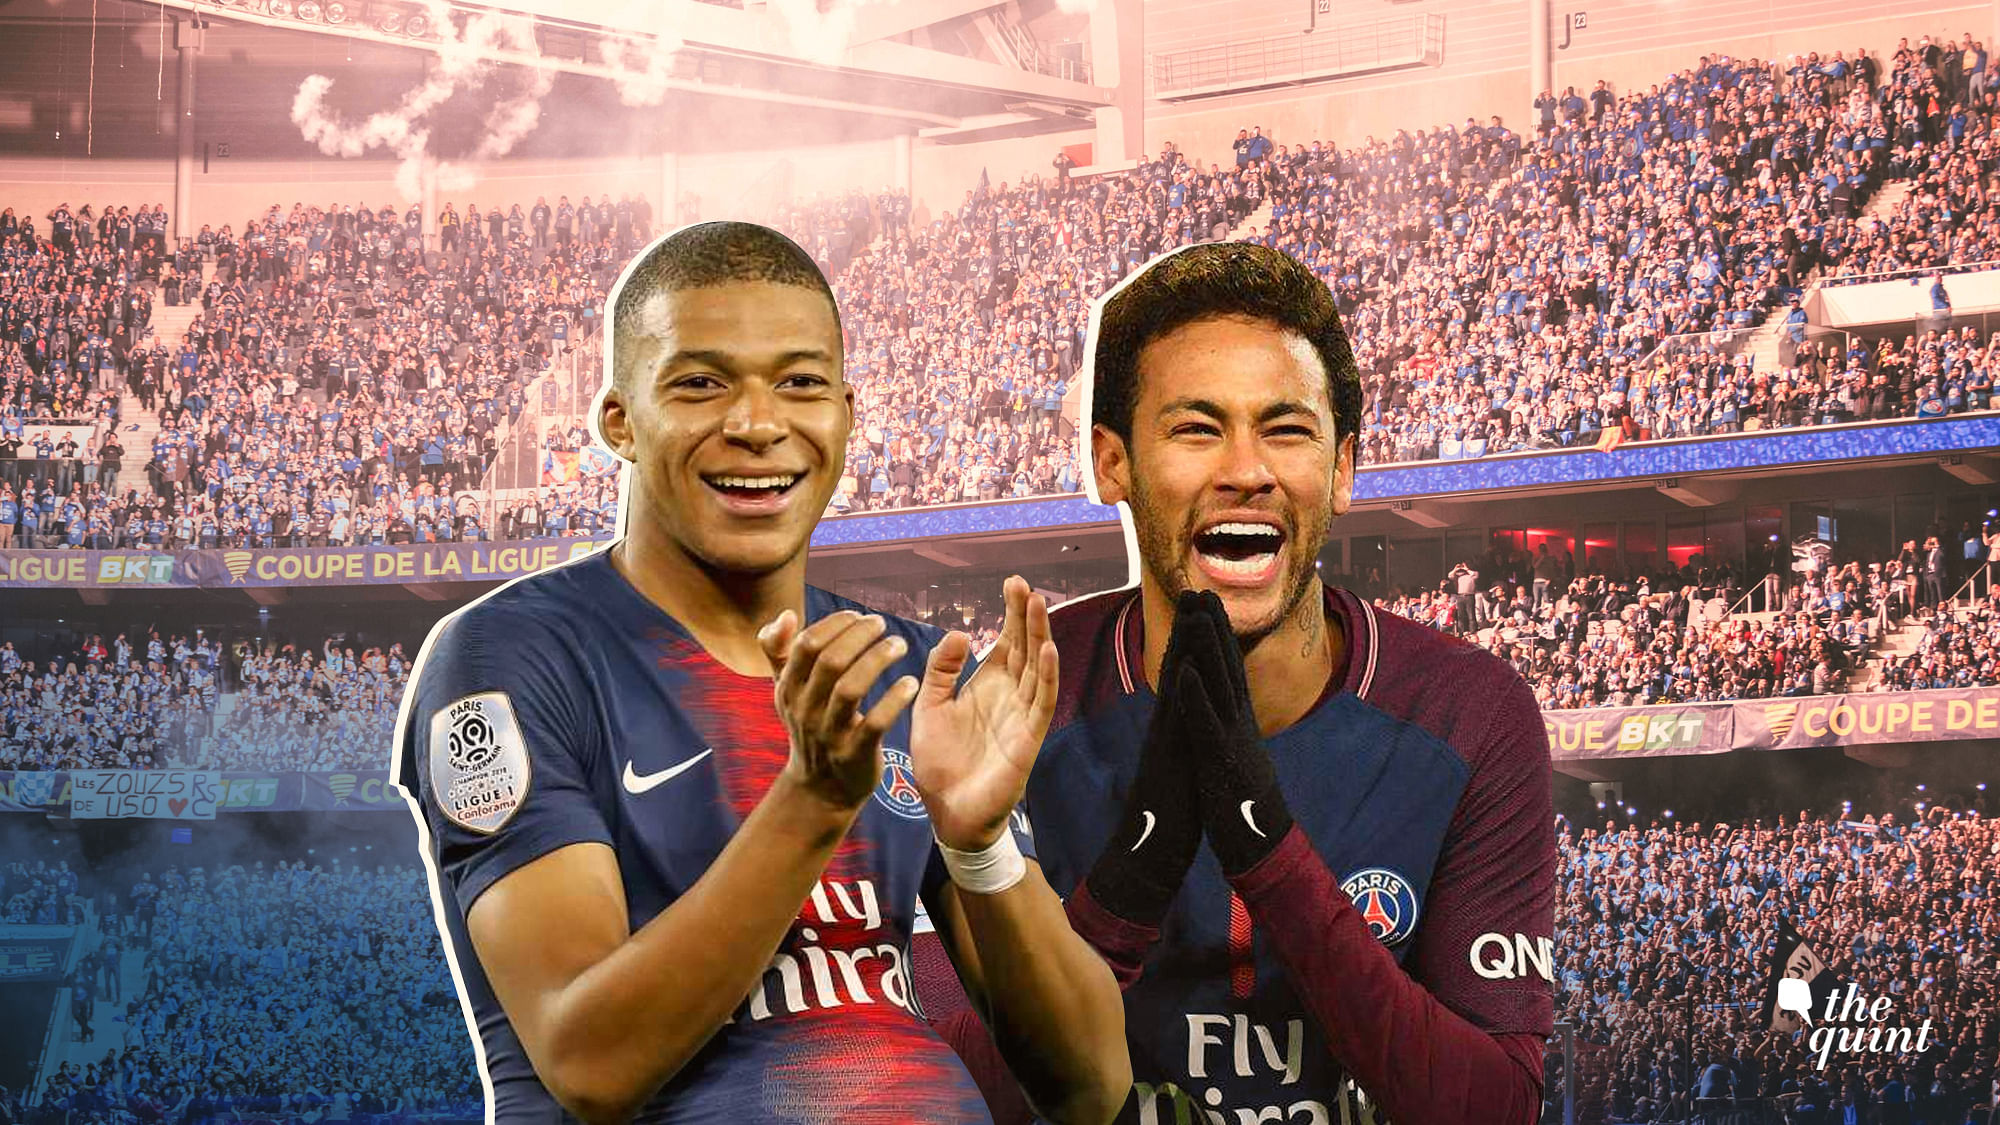 With Kylian Mbappe and Neymar in PSG, France’s Ligue 1 has been dominated by the Paris club for almost the entire last decade.